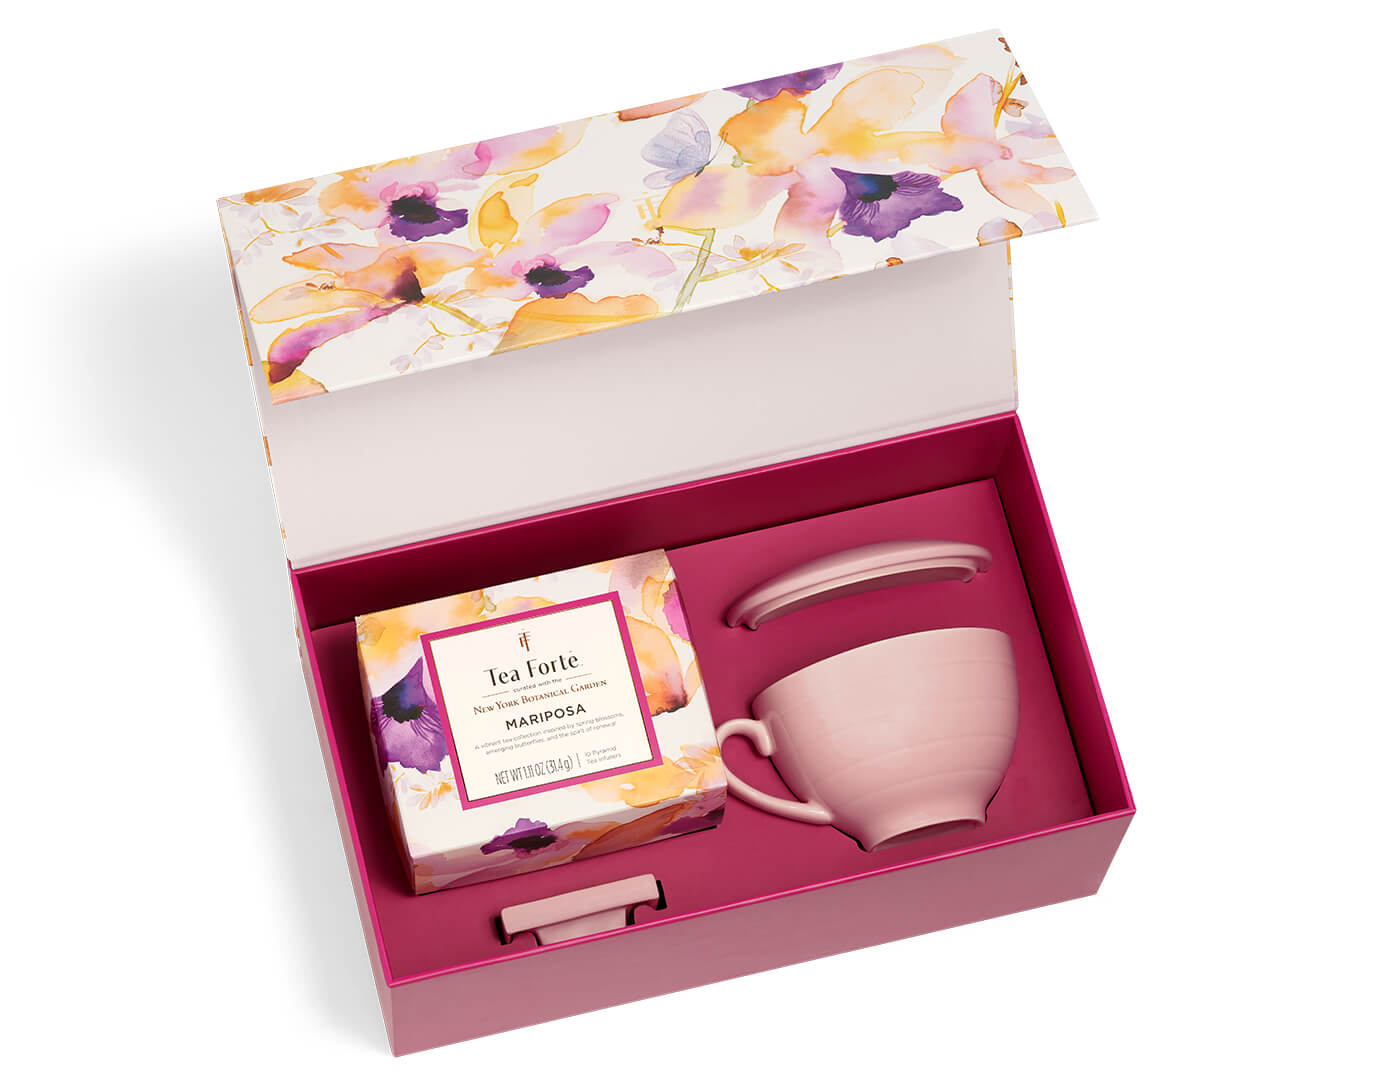 Mariposa Gift Set, open box showing a Mini Petite Box of 10 pyramid tea infusers, one Tea Tray and one Rose Pink Café Cup